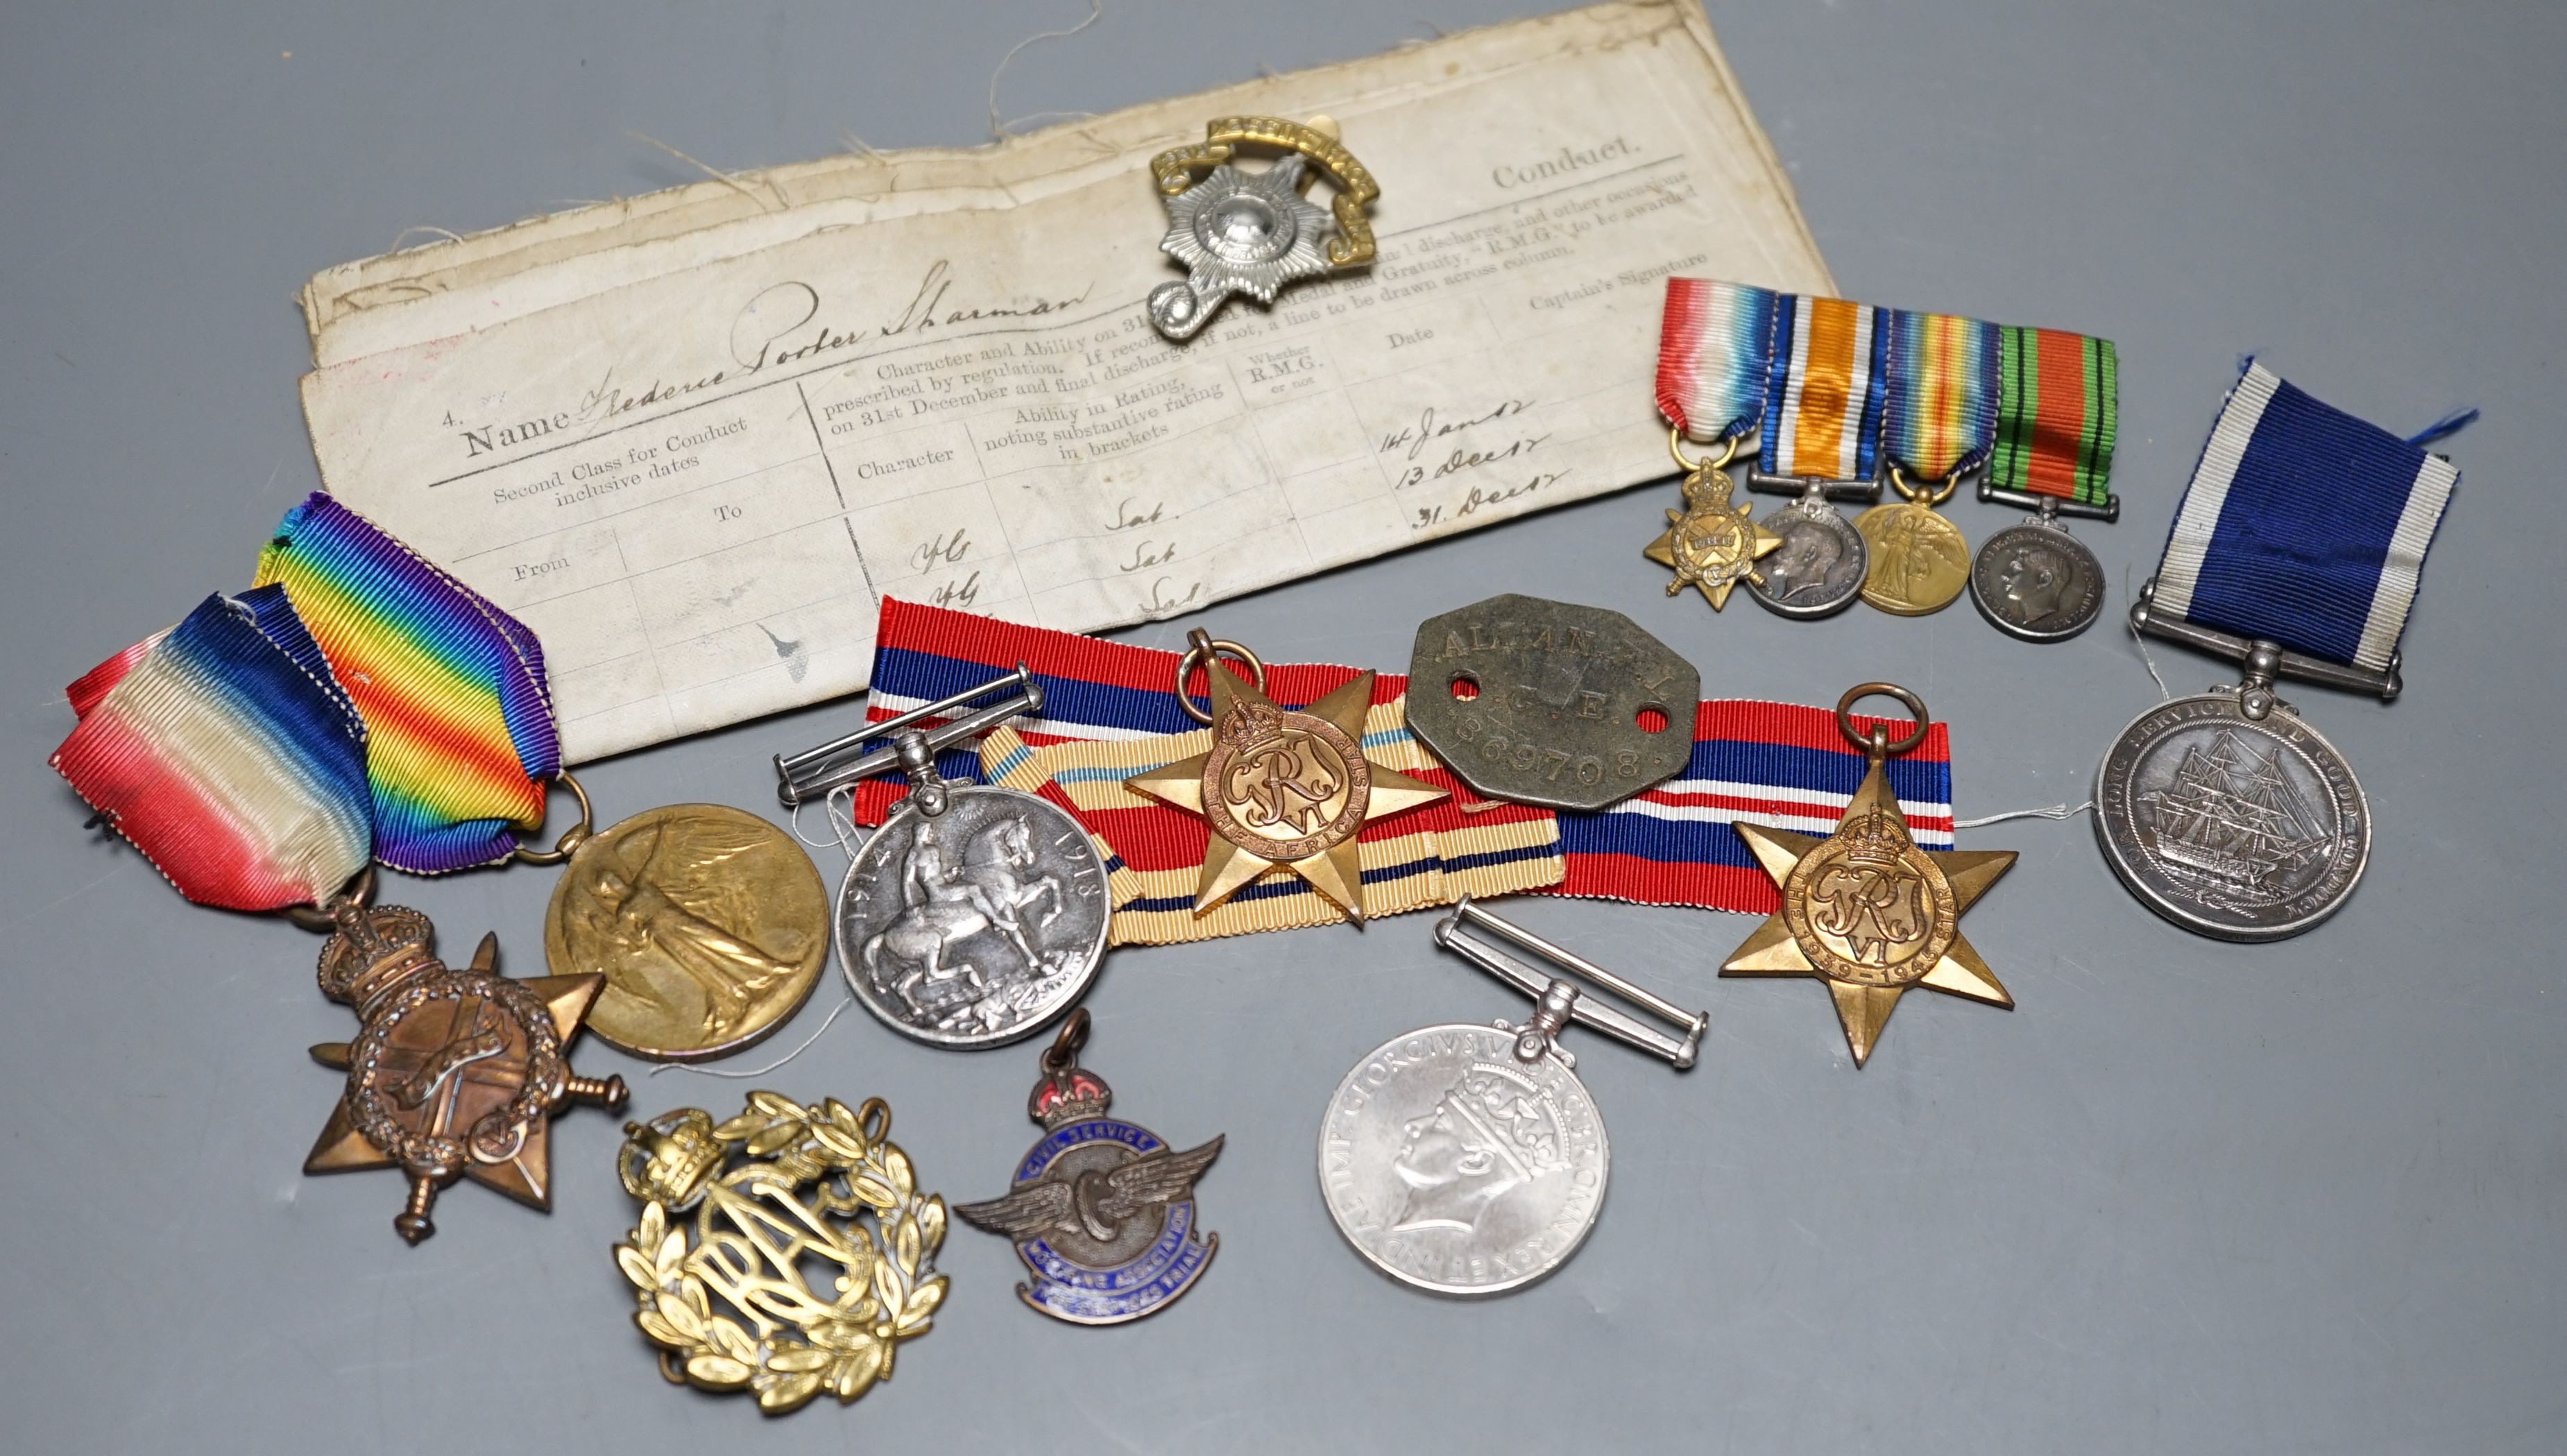 A WWI medal trio awarded to J. 11048 F. P. SHARMAN. A.B. R.N., a George V Royal Navy long service and good conduct medal awarded to M.38014 F. P. SHARMAN. R. P O. H.M.S. REPULSE, a WWI miniature dress medal group, a WWII